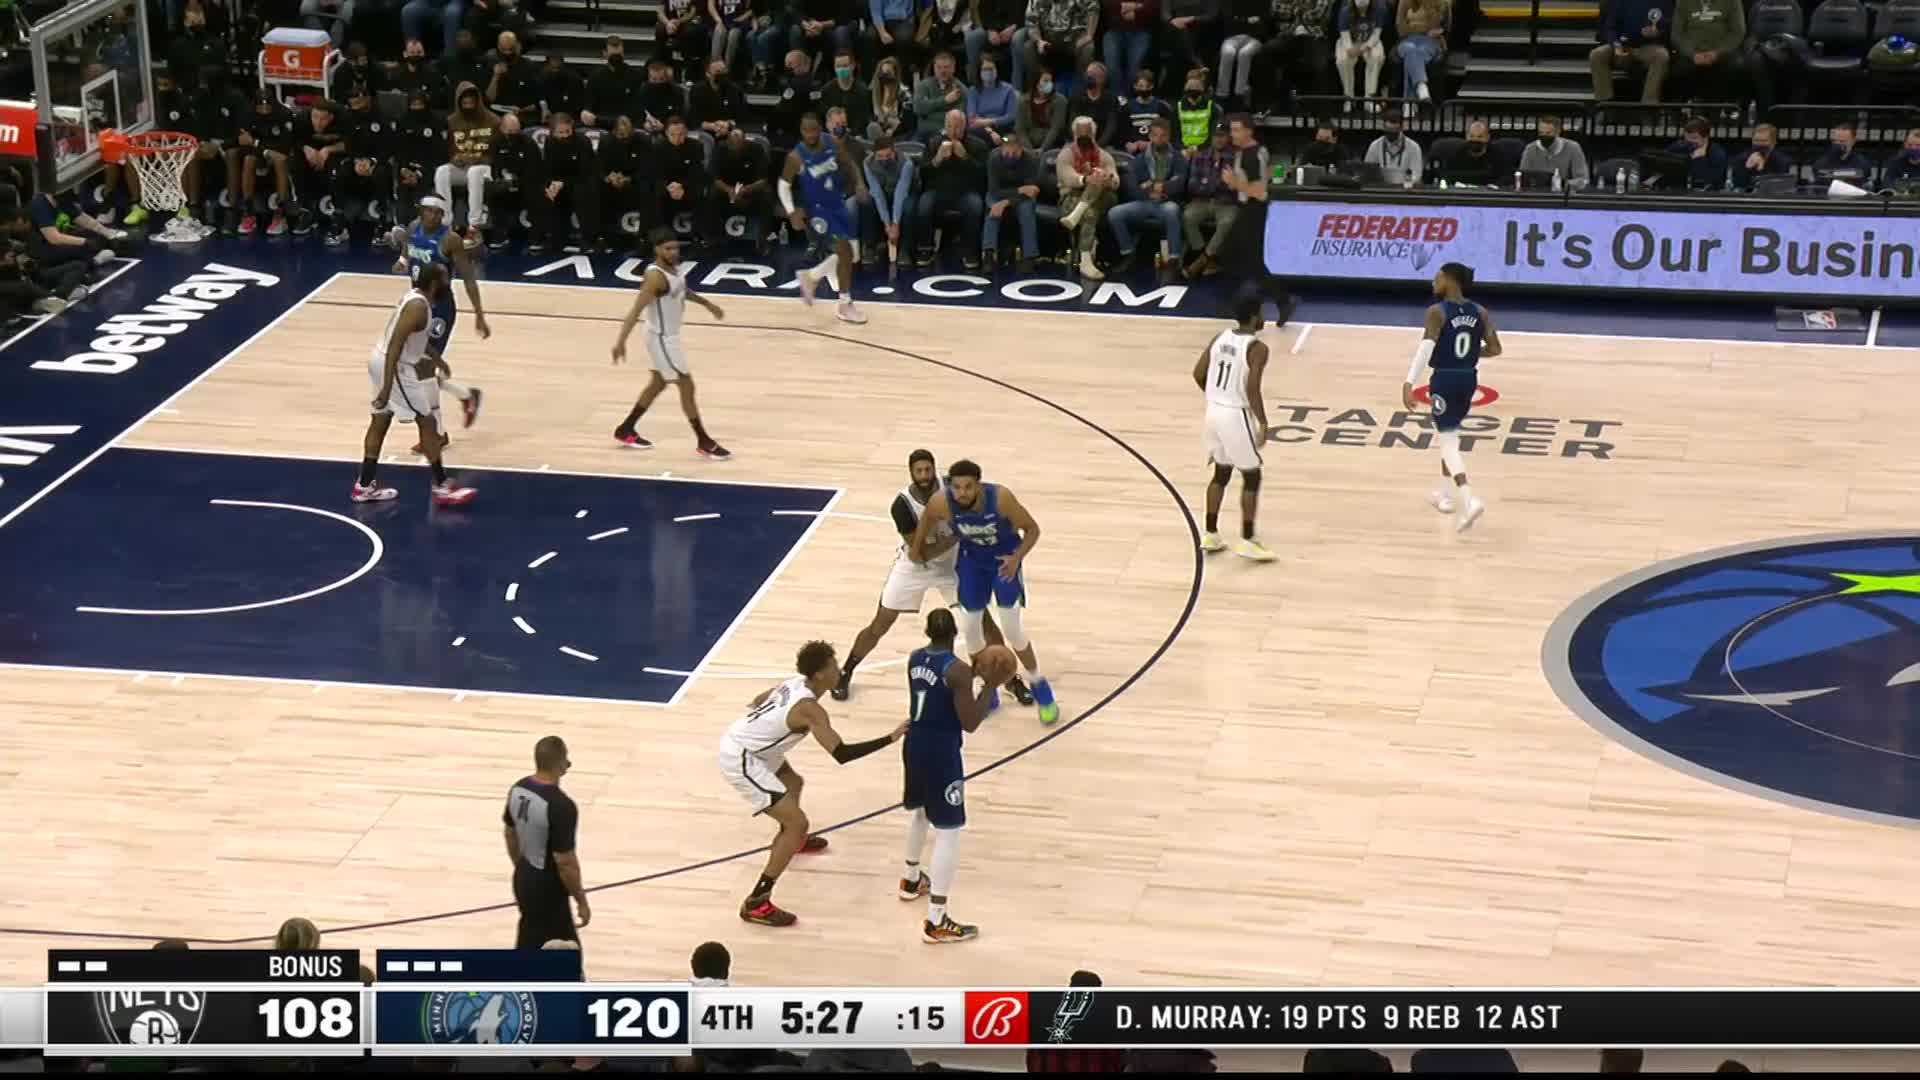 Dunk by Karl-Anthony Towns